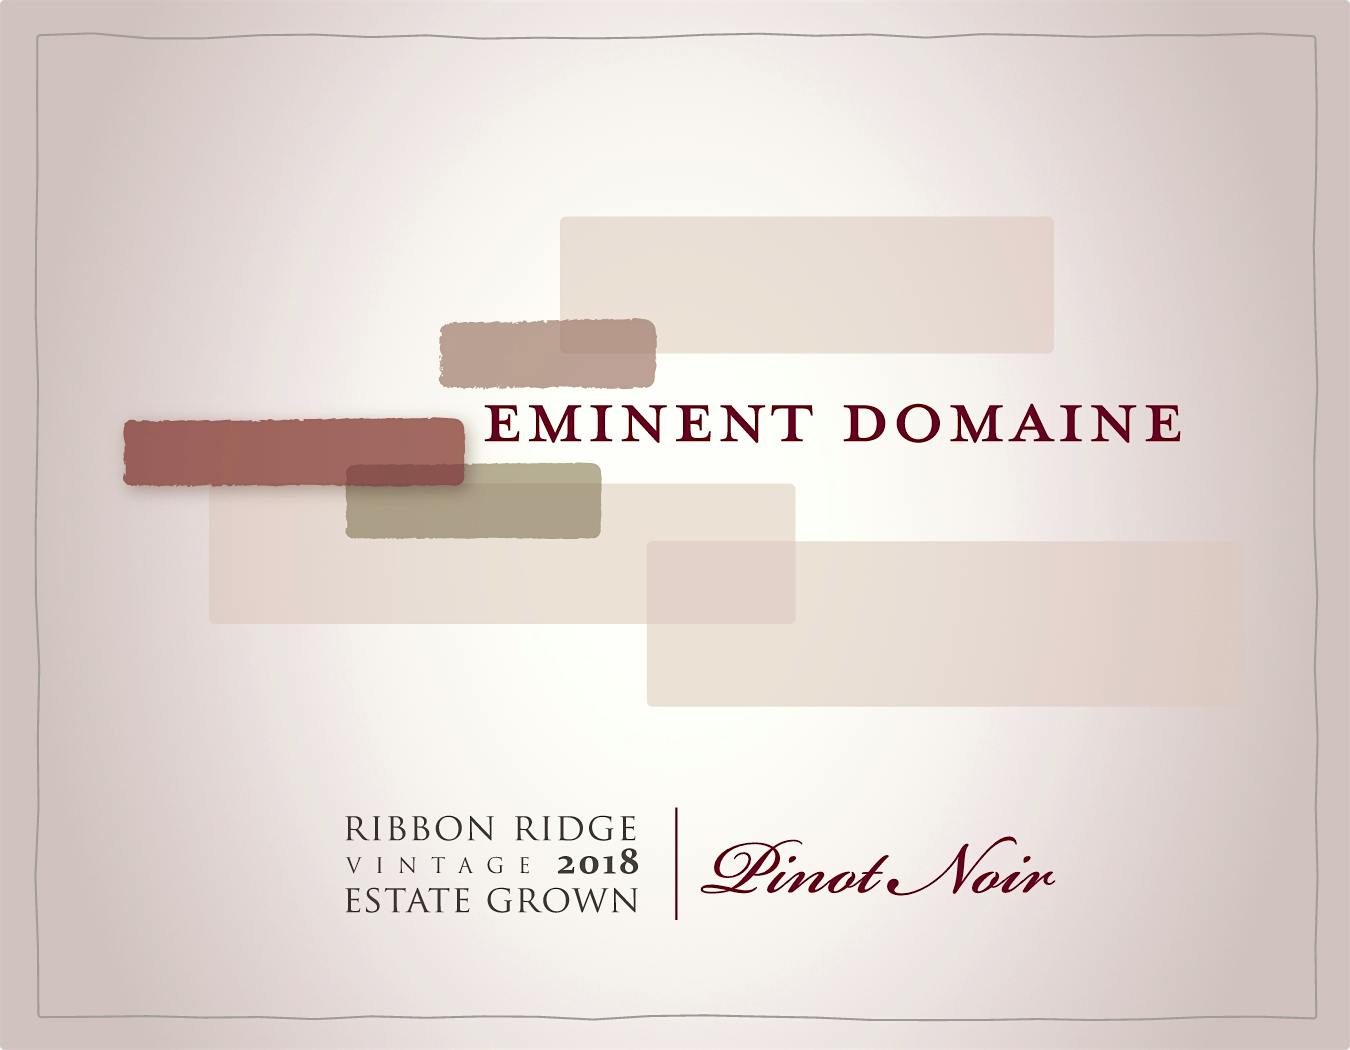 Label for Eminent Domaine